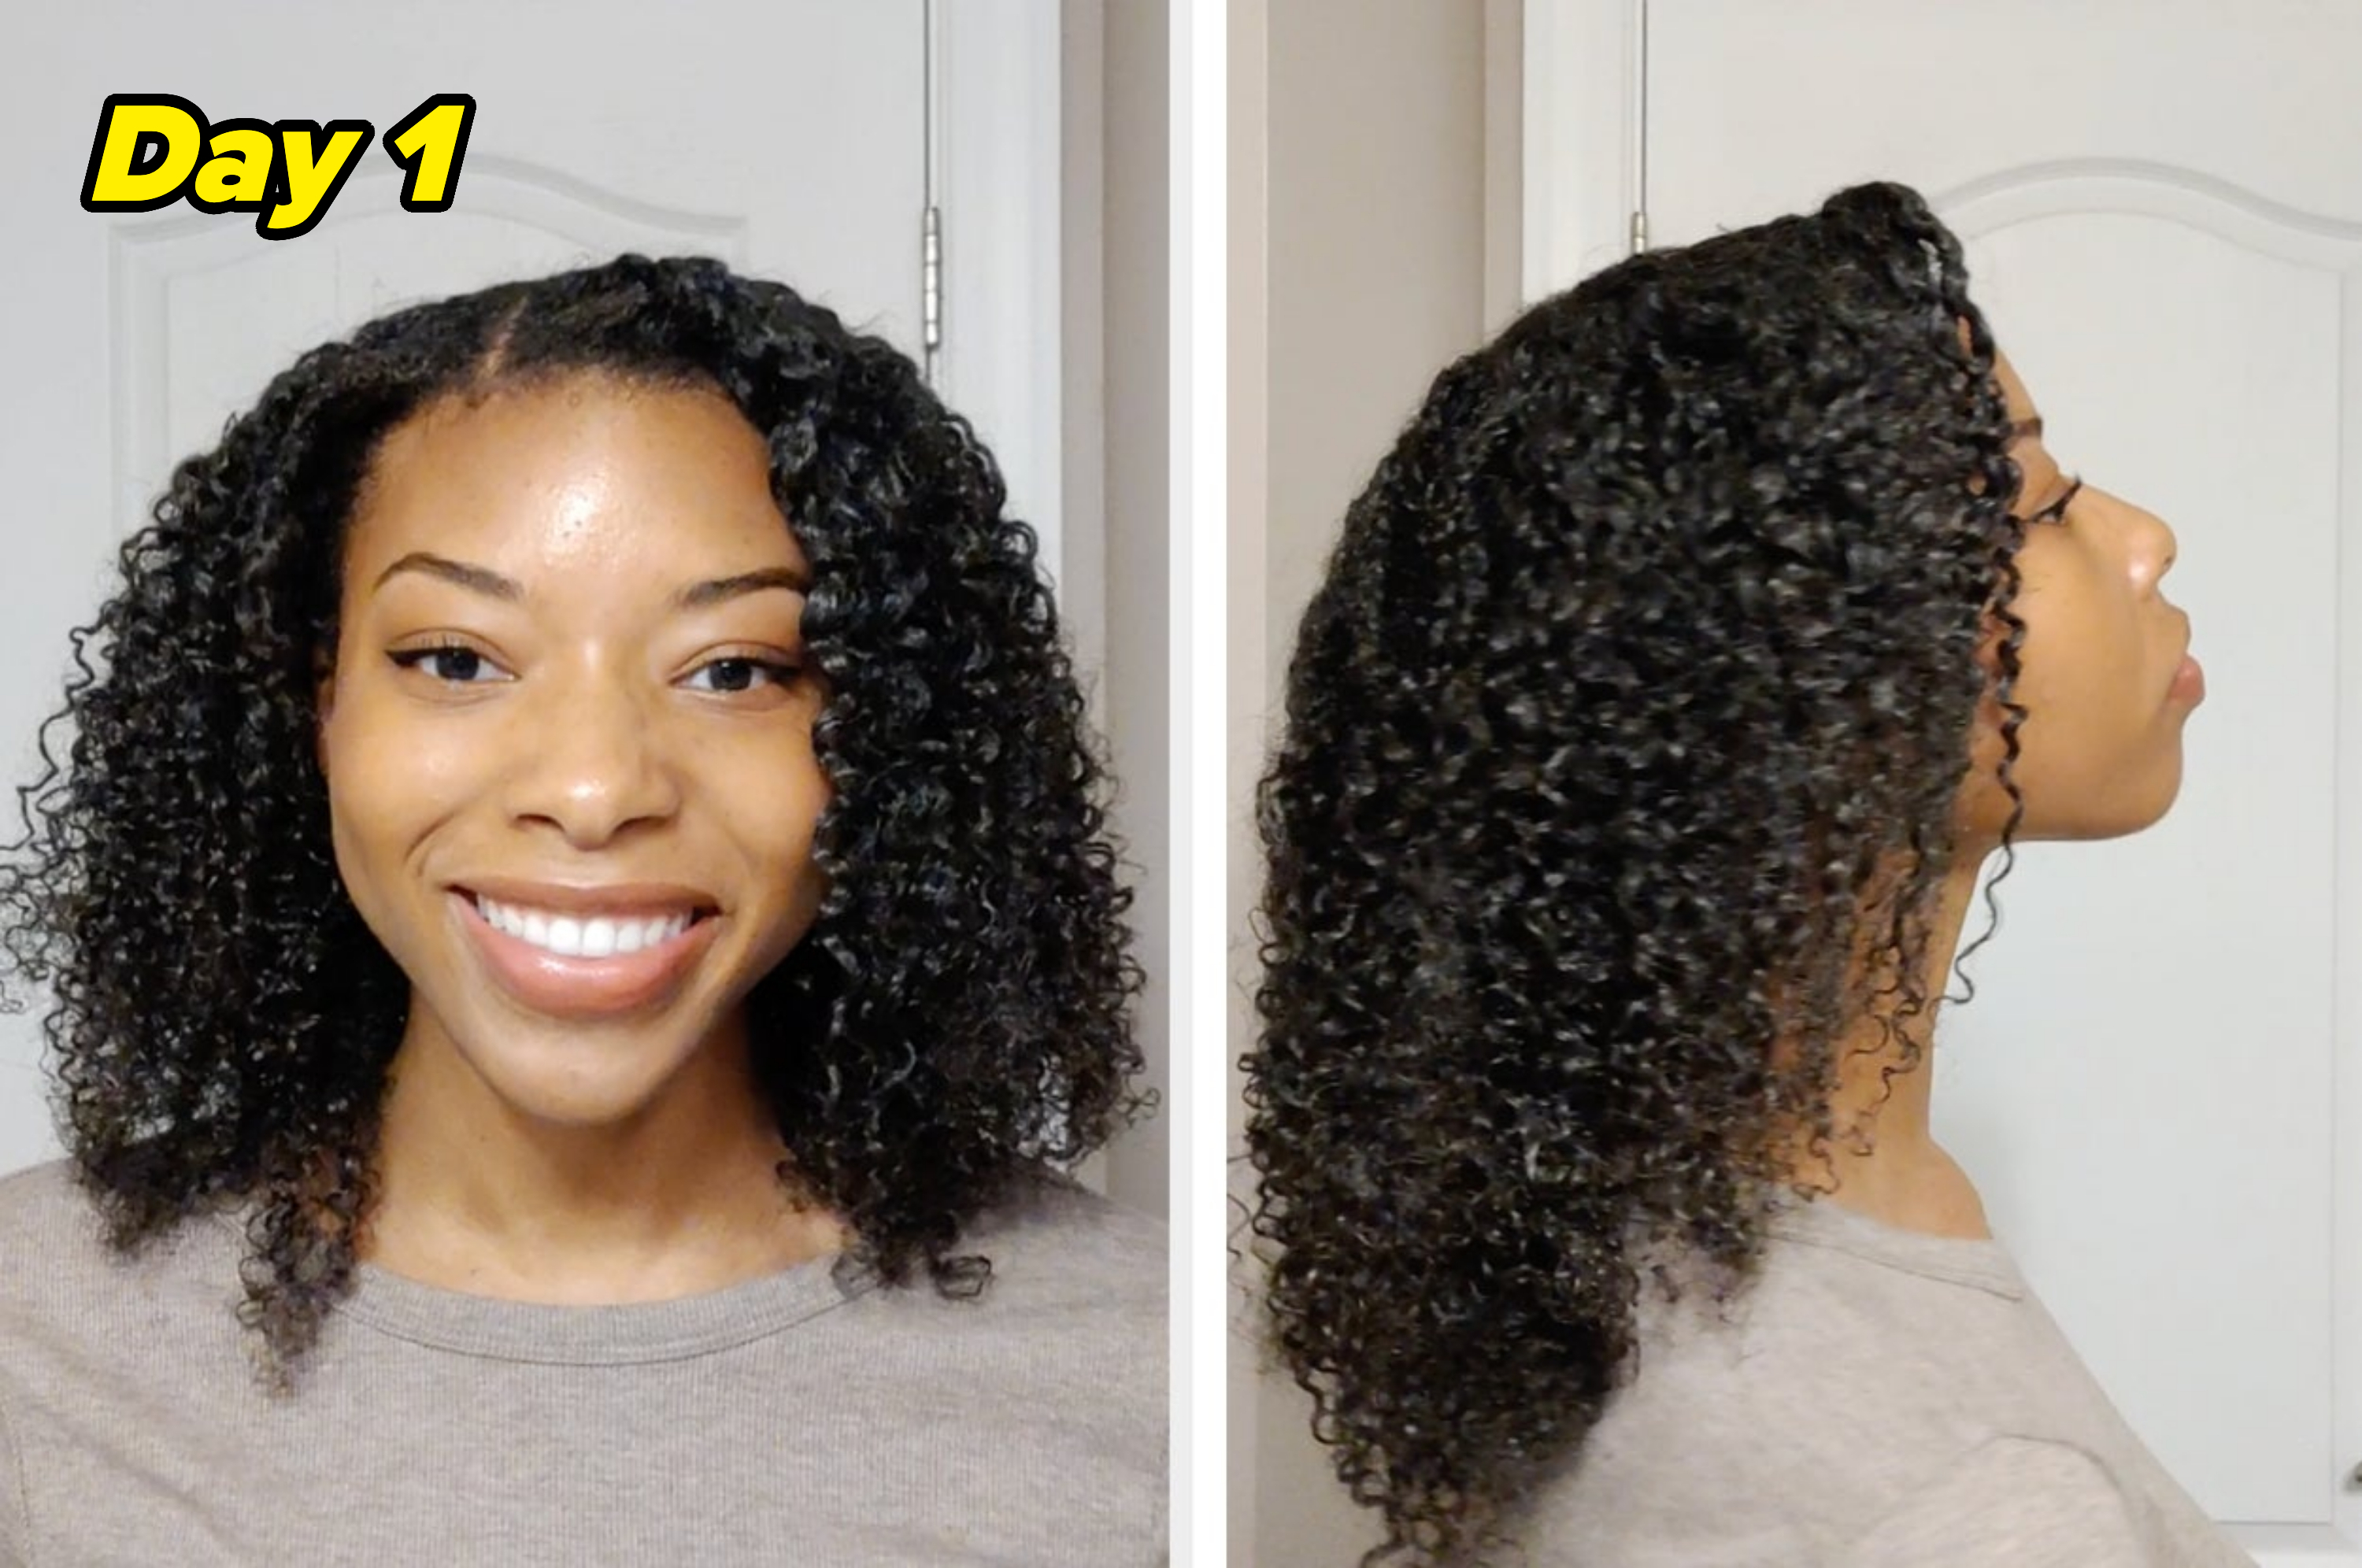 Showcasing my curls on day one, front and side views; the curls are defined and bouncy